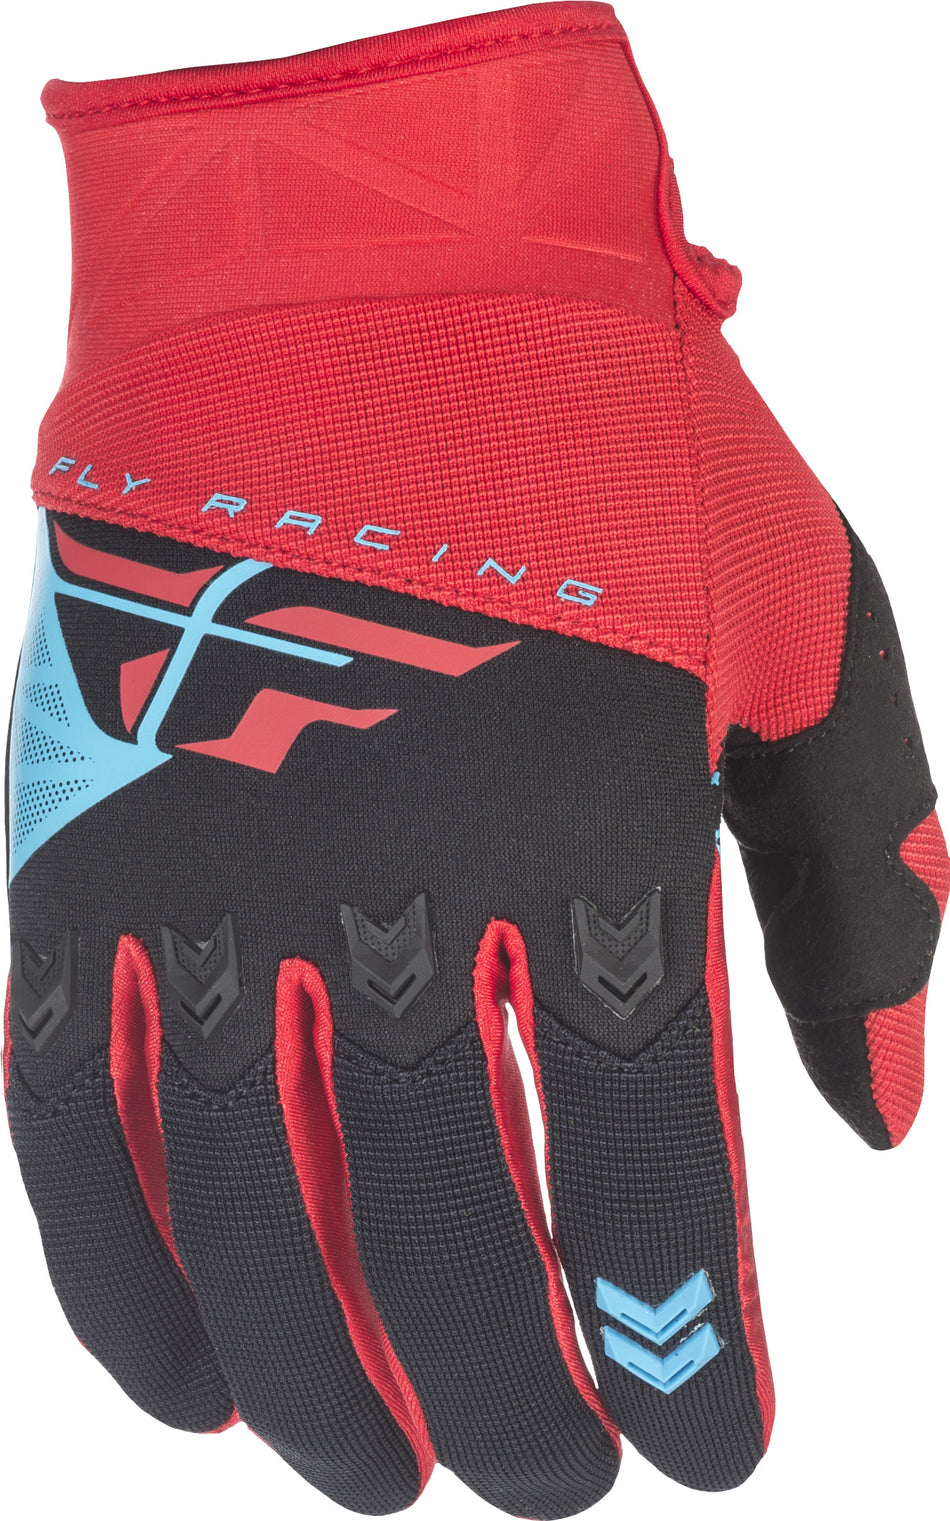 FLY RACING F-16 Gloves Red/Black Sz 1 371-91201